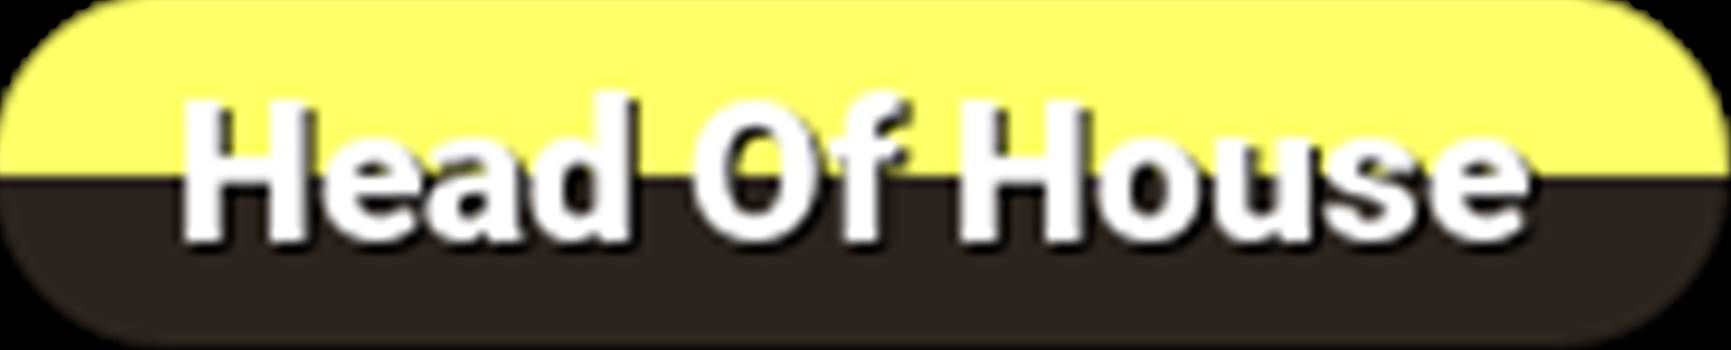 Solea head-of-house.png - 